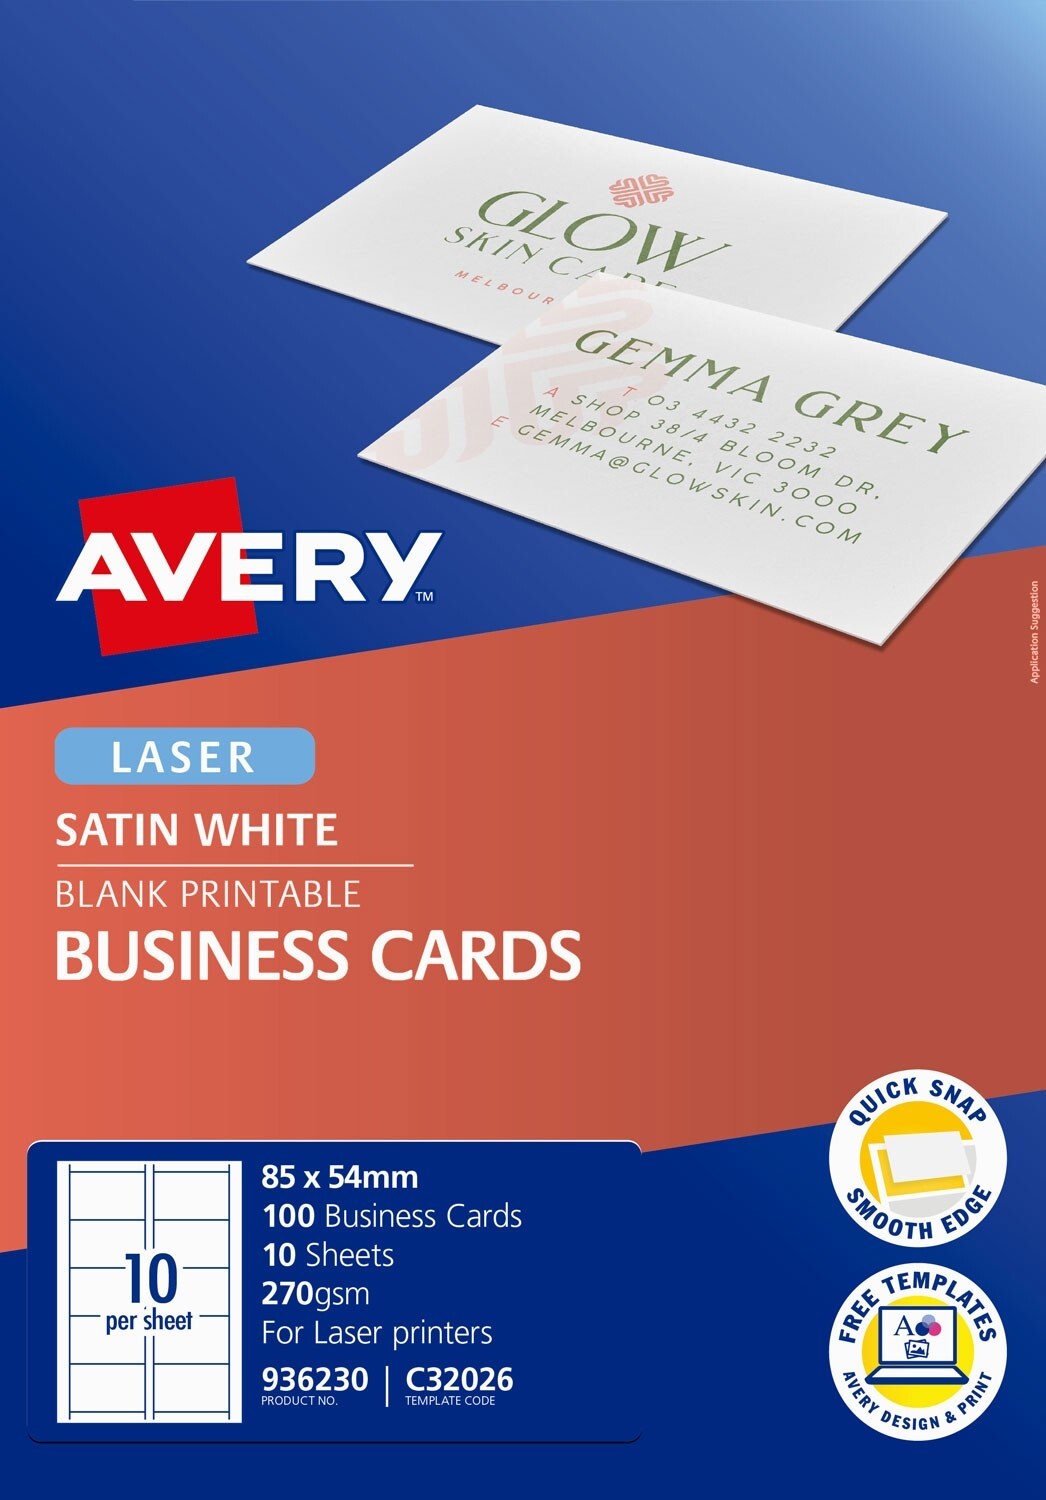 Avery(R) Note Cards with Envelopes, 4-1/4 x 5-1/2, White, 60